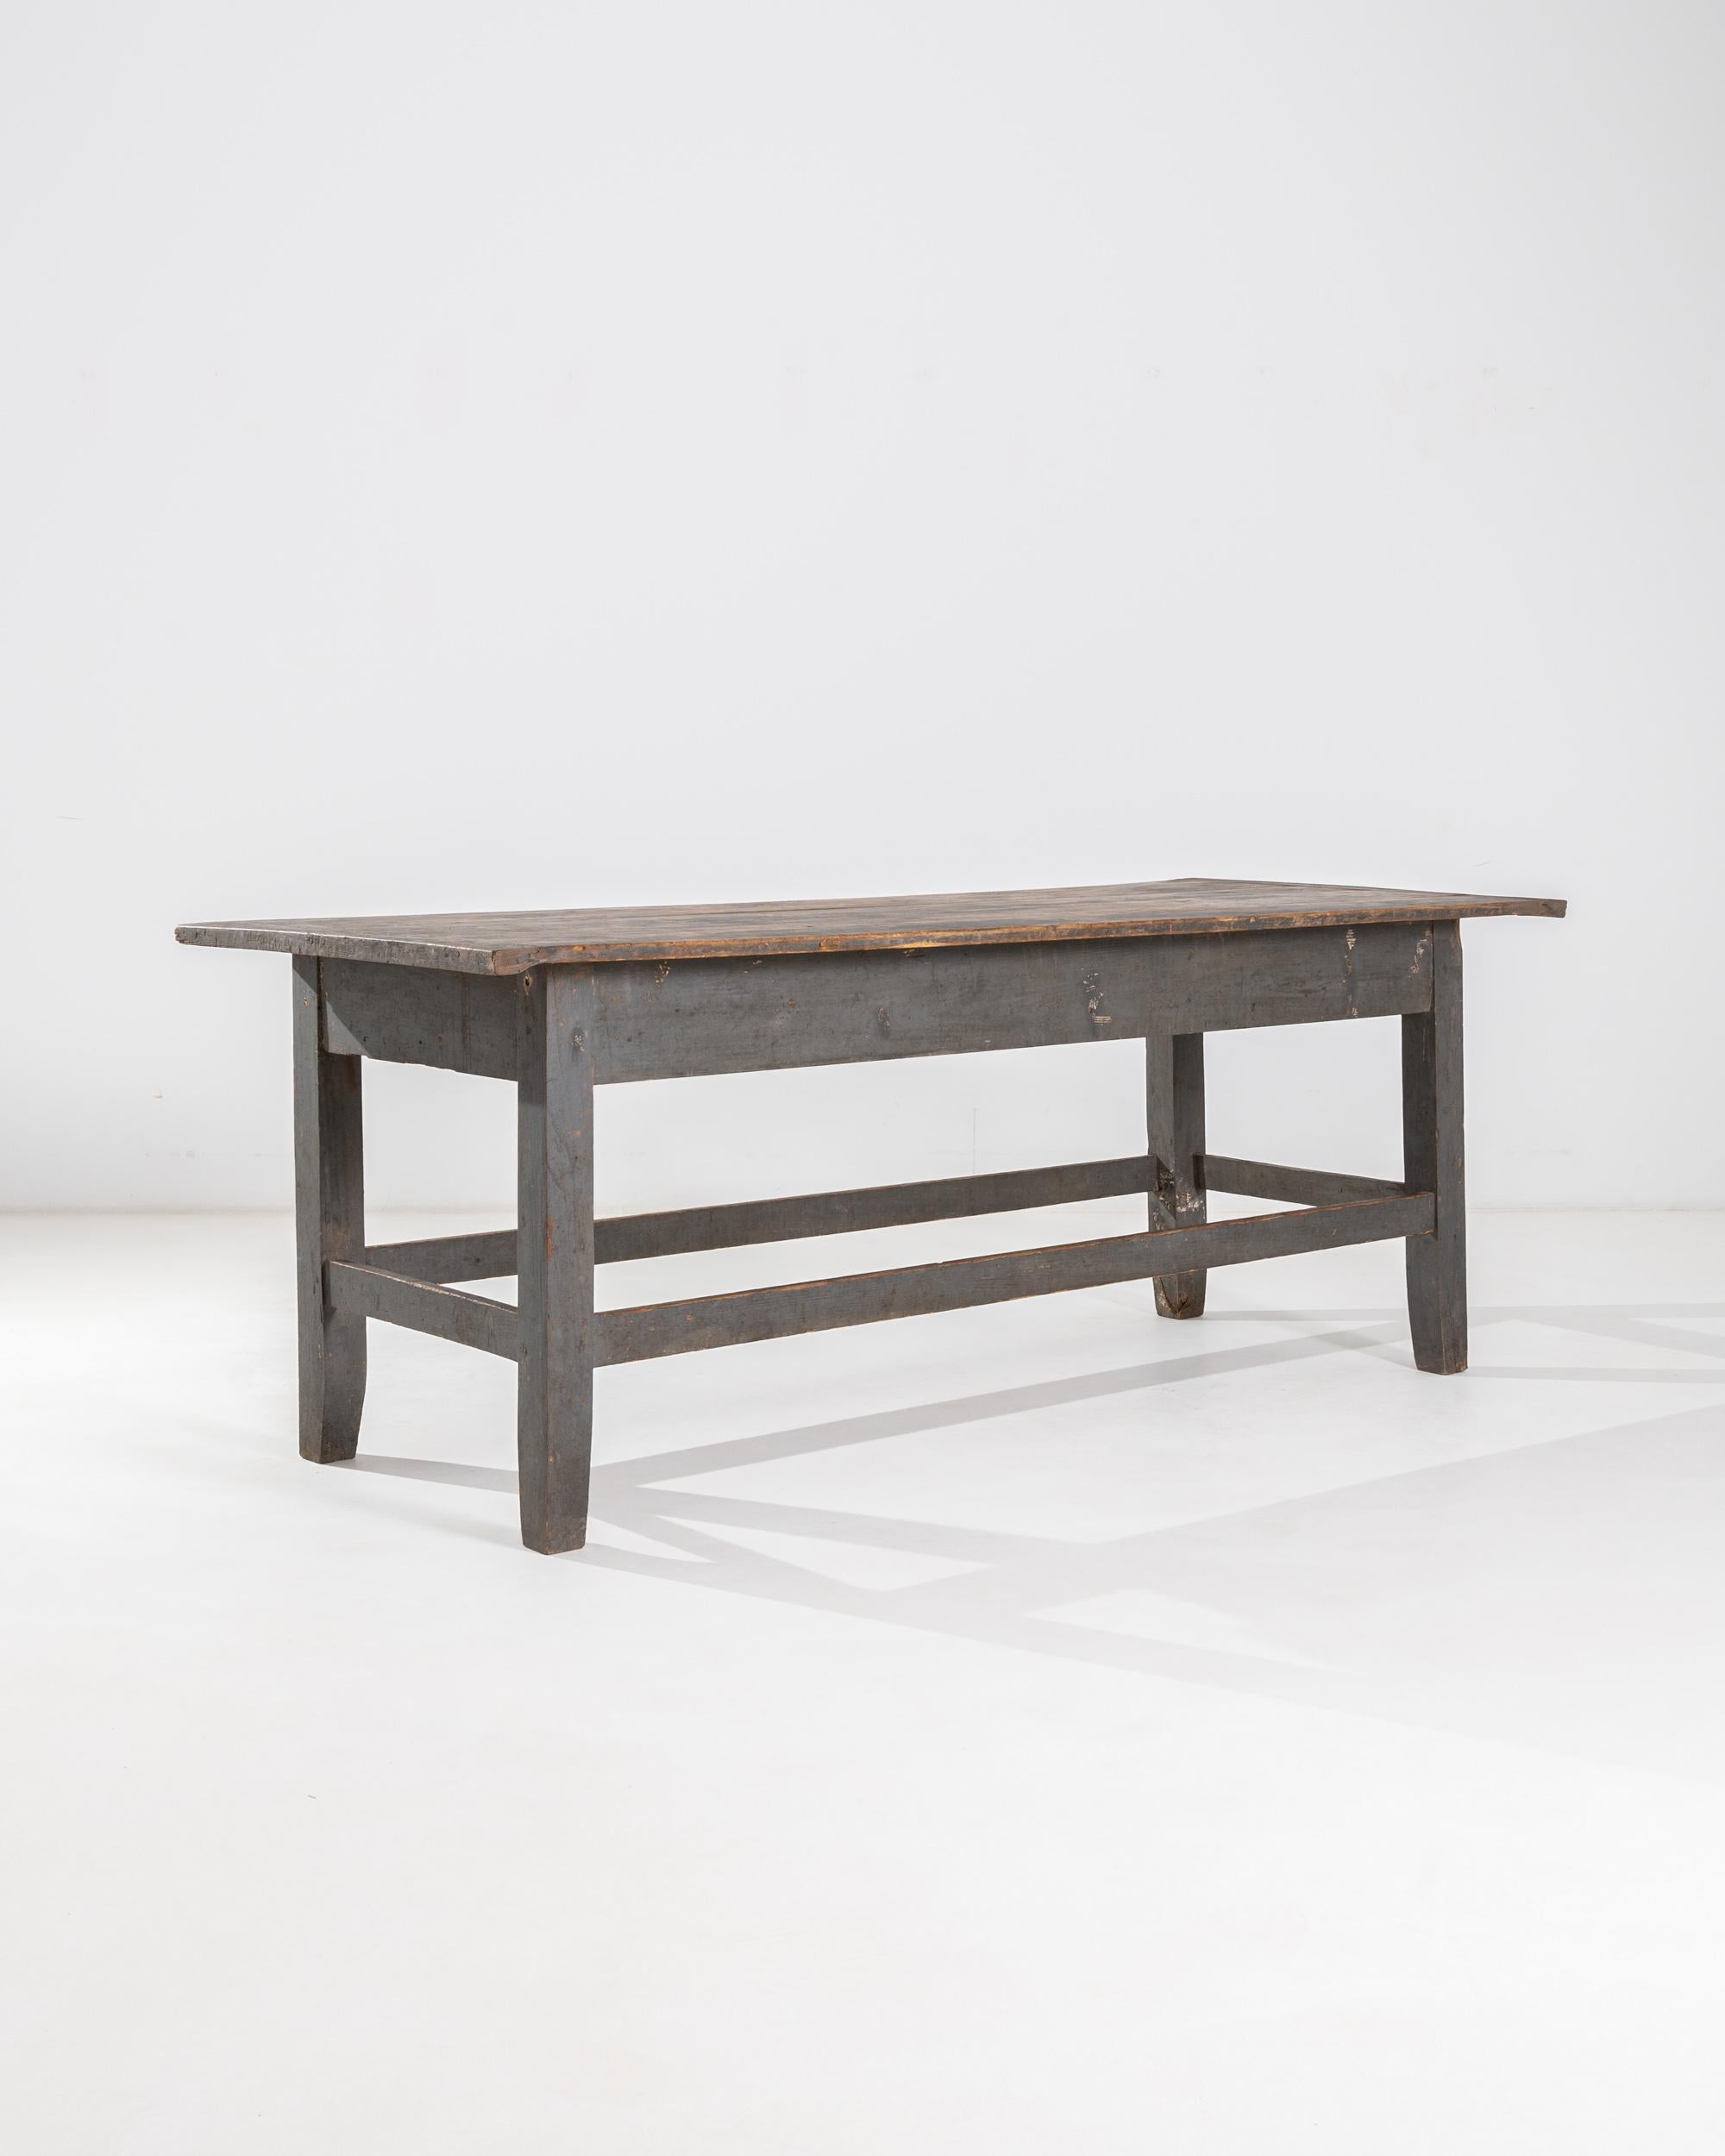 A twentieth century French wooden table. A minimal and sturdy construction characterizes this timeless Farm table. A lighter brown table top rests upon gray legs and aprons, connected by mortise and tenon joinery. A surprising and comforting array